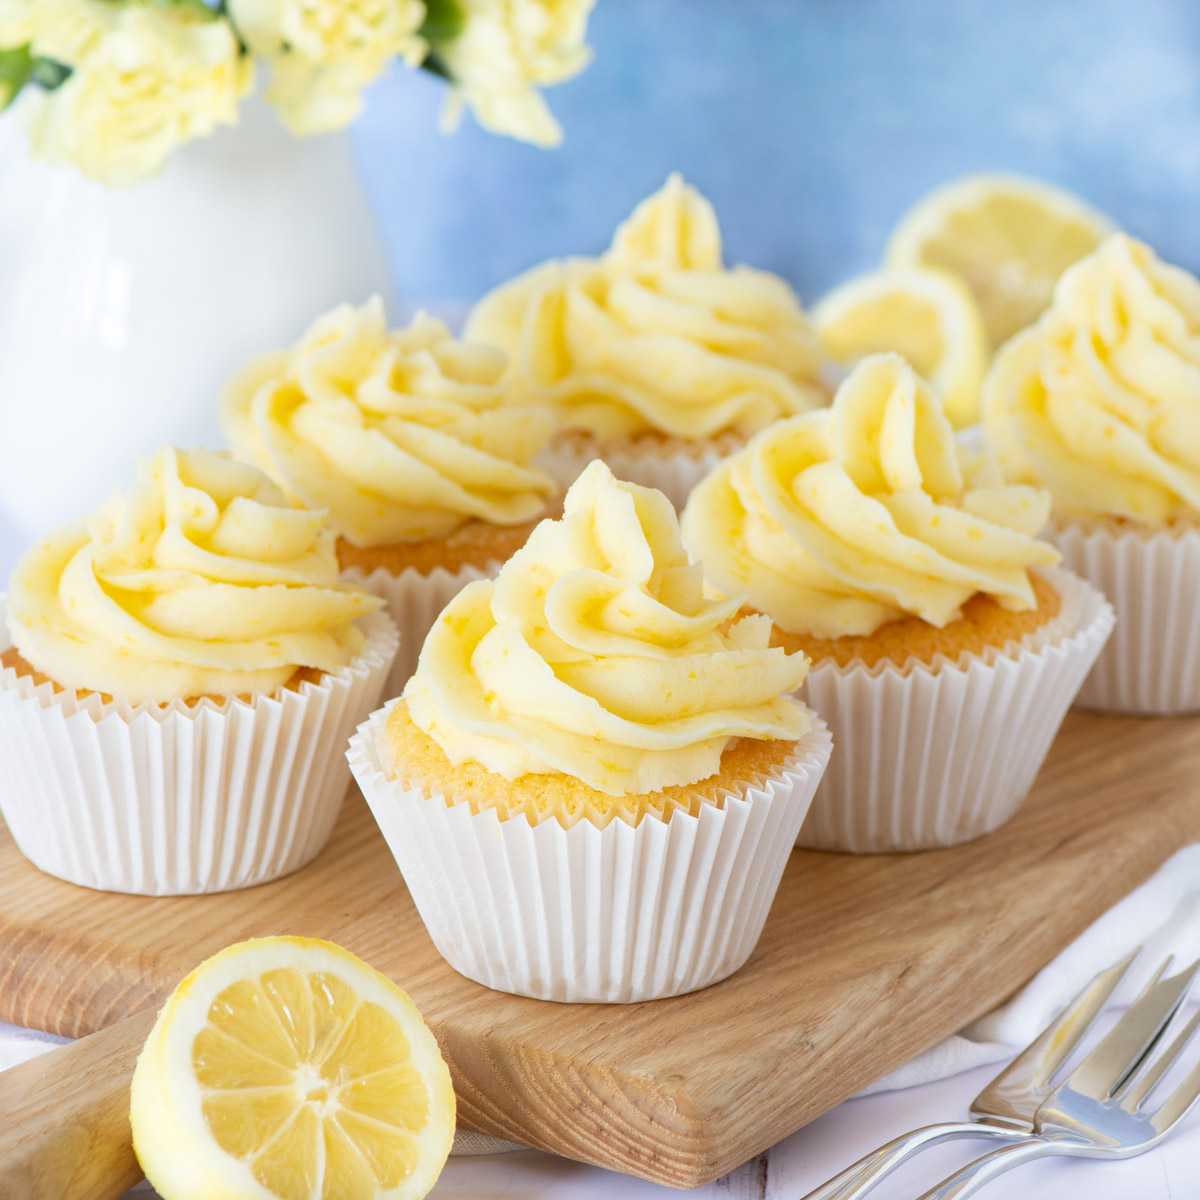 Lemon buttercream made with fresh lemon juice and zest. Perfect for decorating cakes and cupcakes or filling biscuits and macarons.